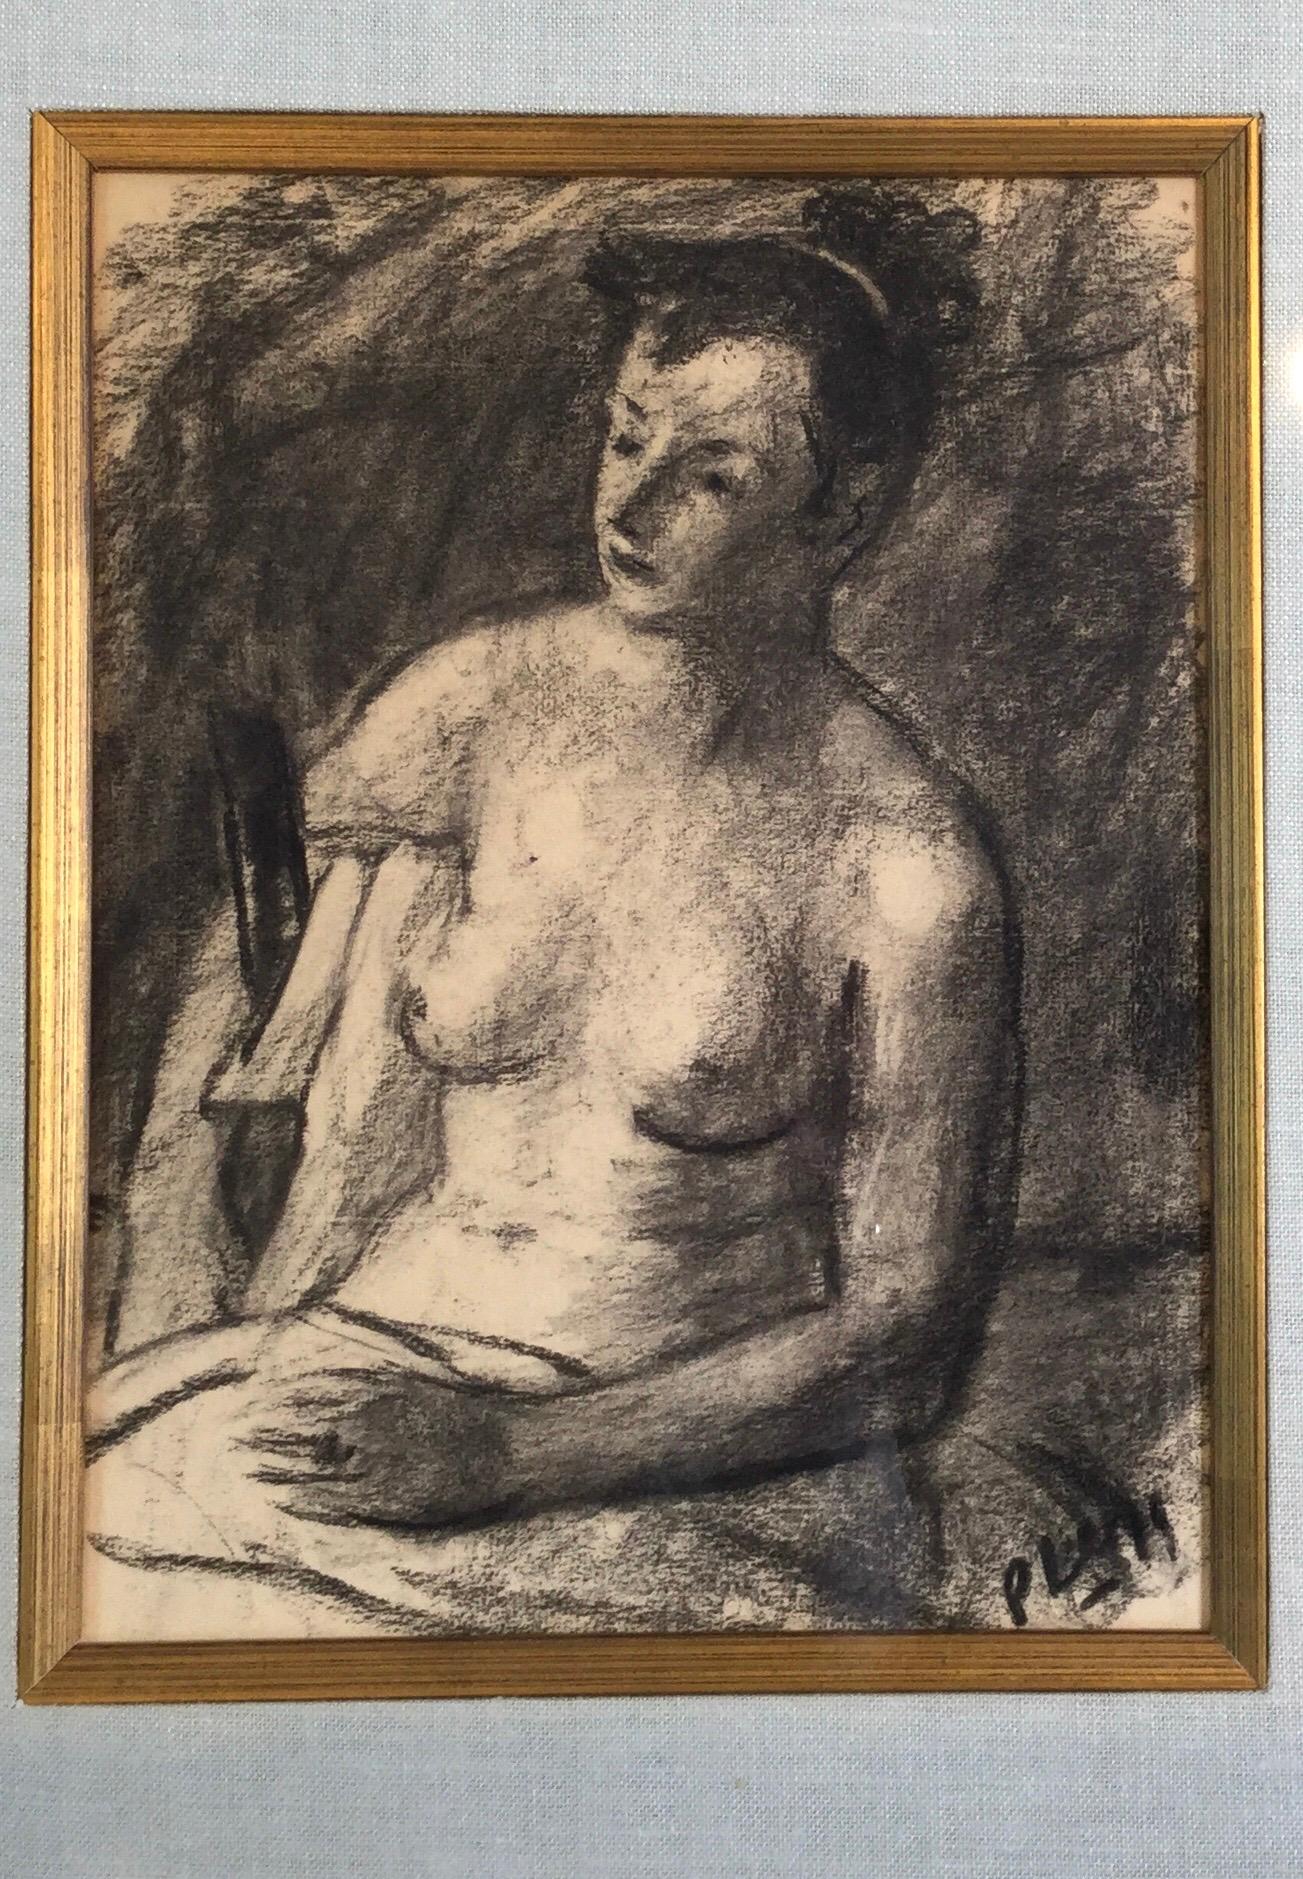 Robert Philipp is a noted artist. This is a pleasing figure charcoal nude on paper. Signed lower right corner. Nicely framed and matted. Overall size: 19 by 22